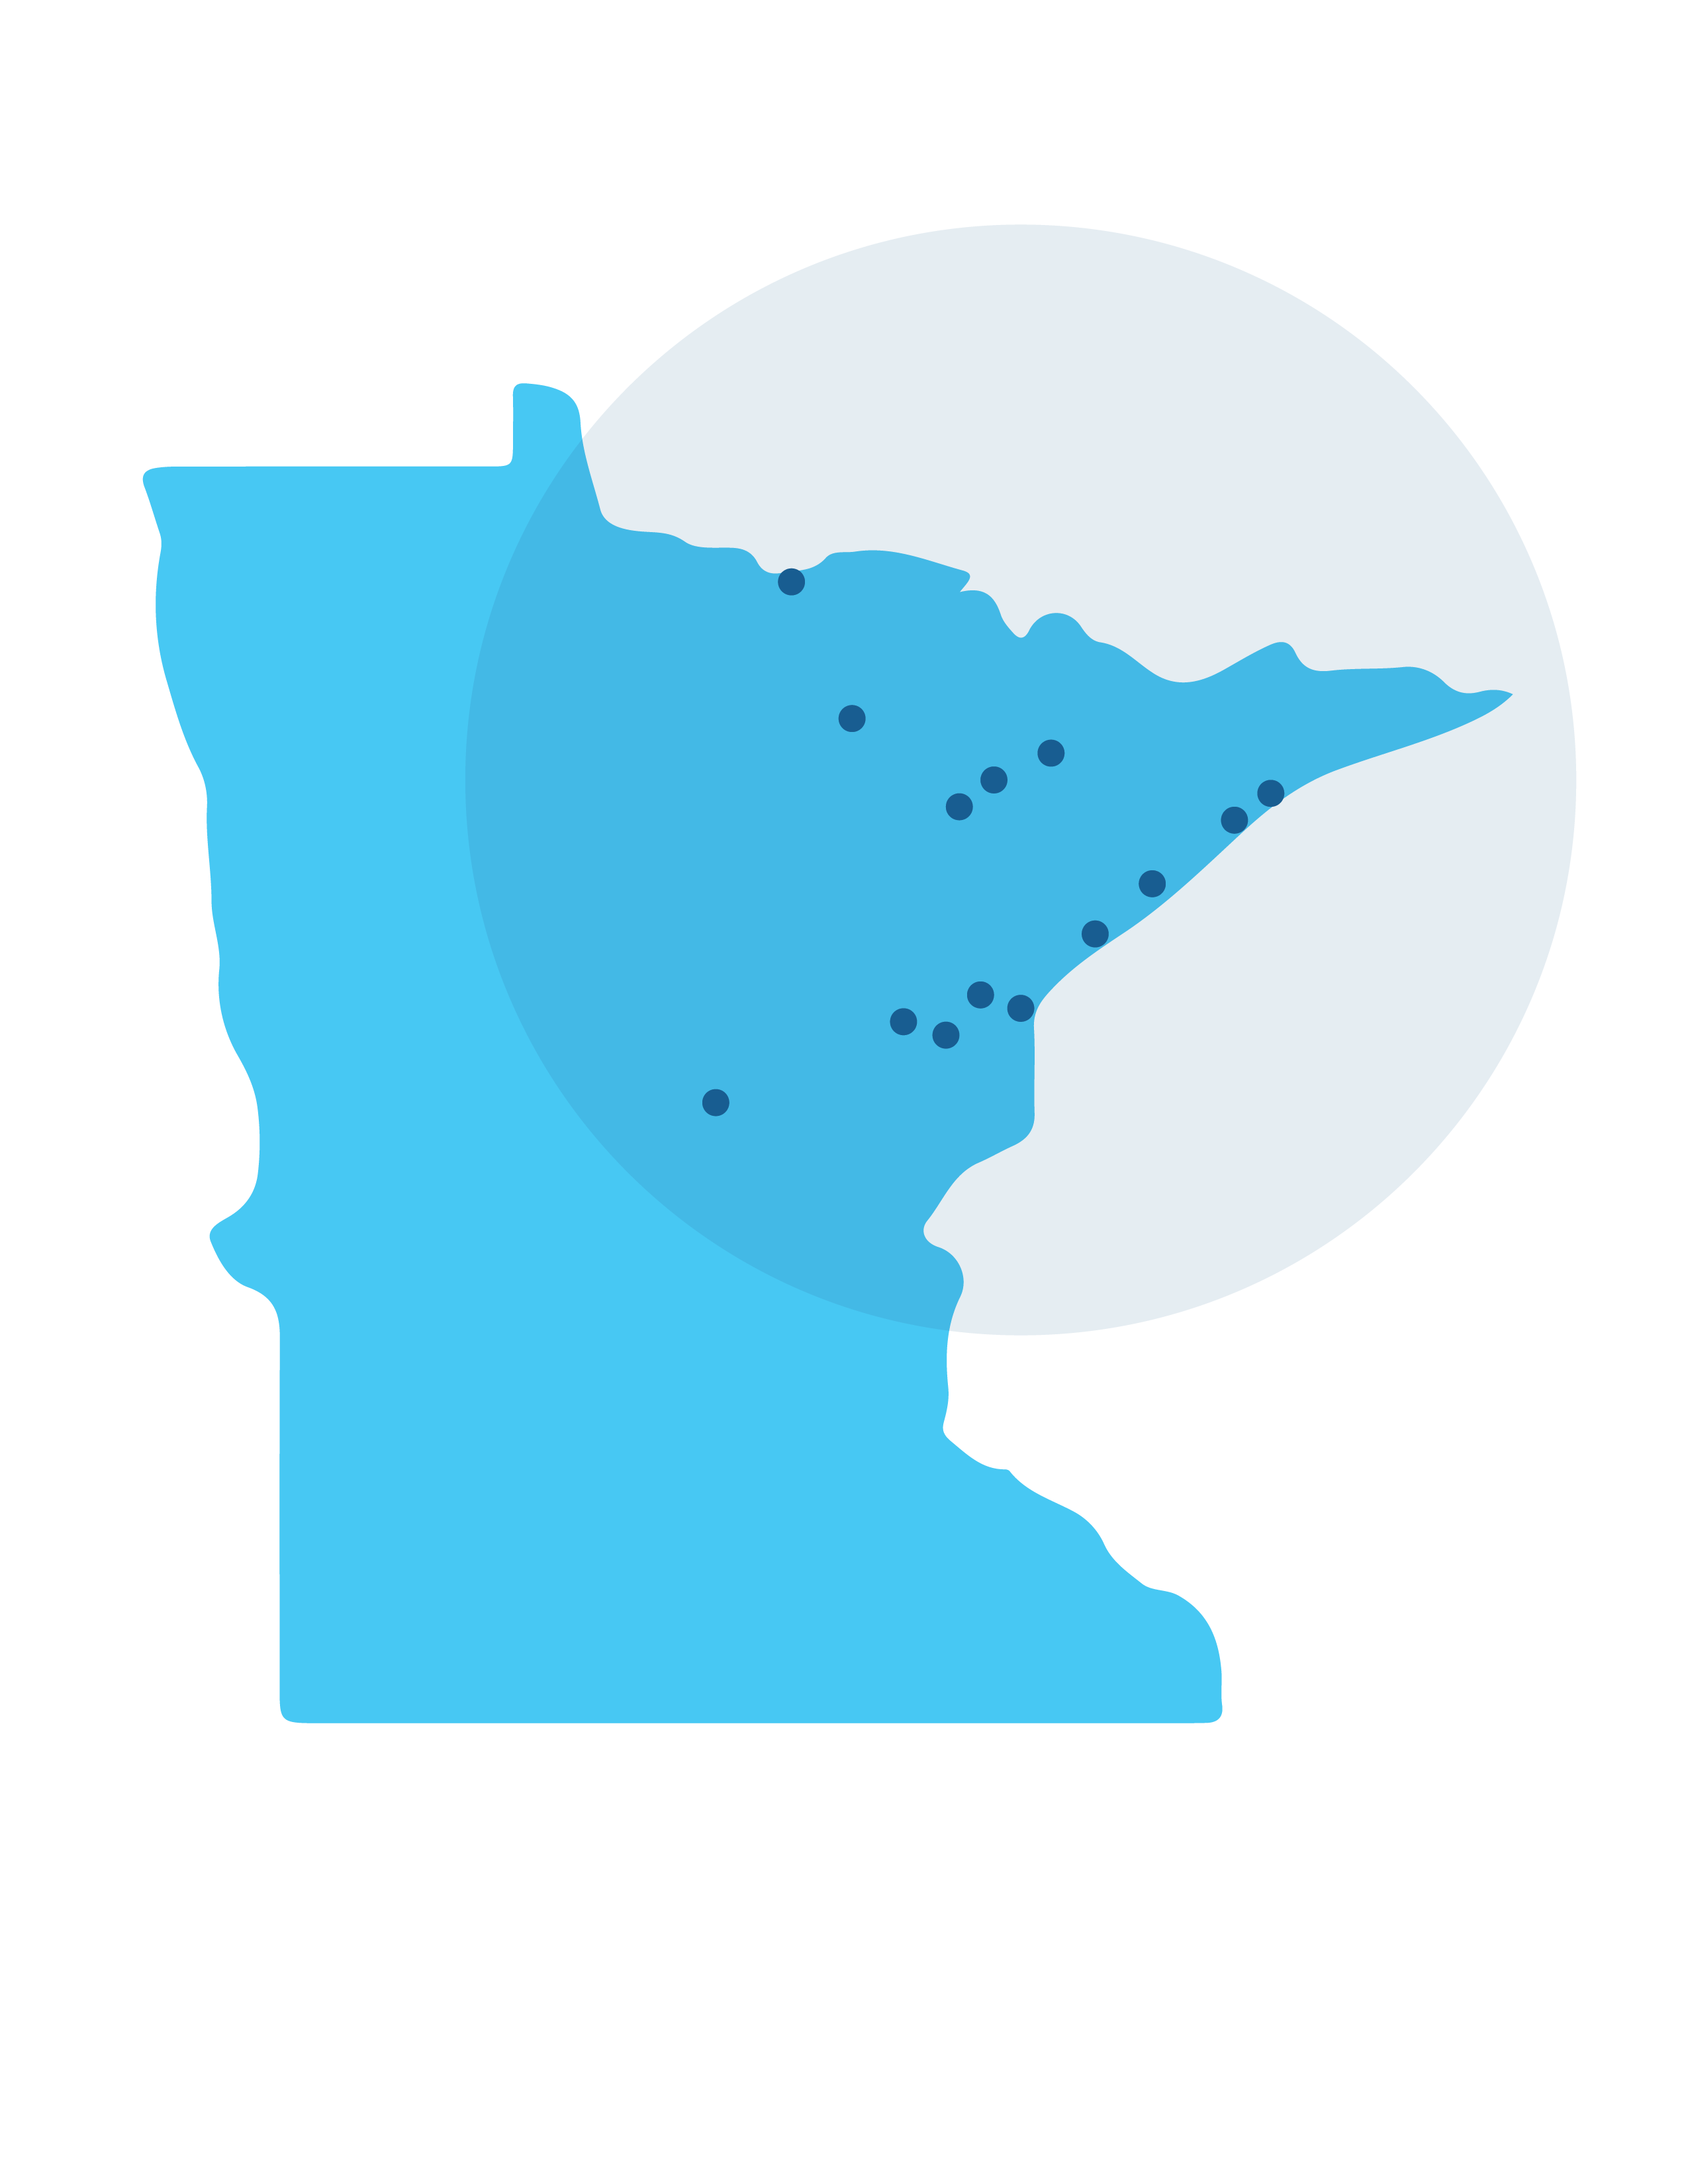 10k lakes map of MN service areas